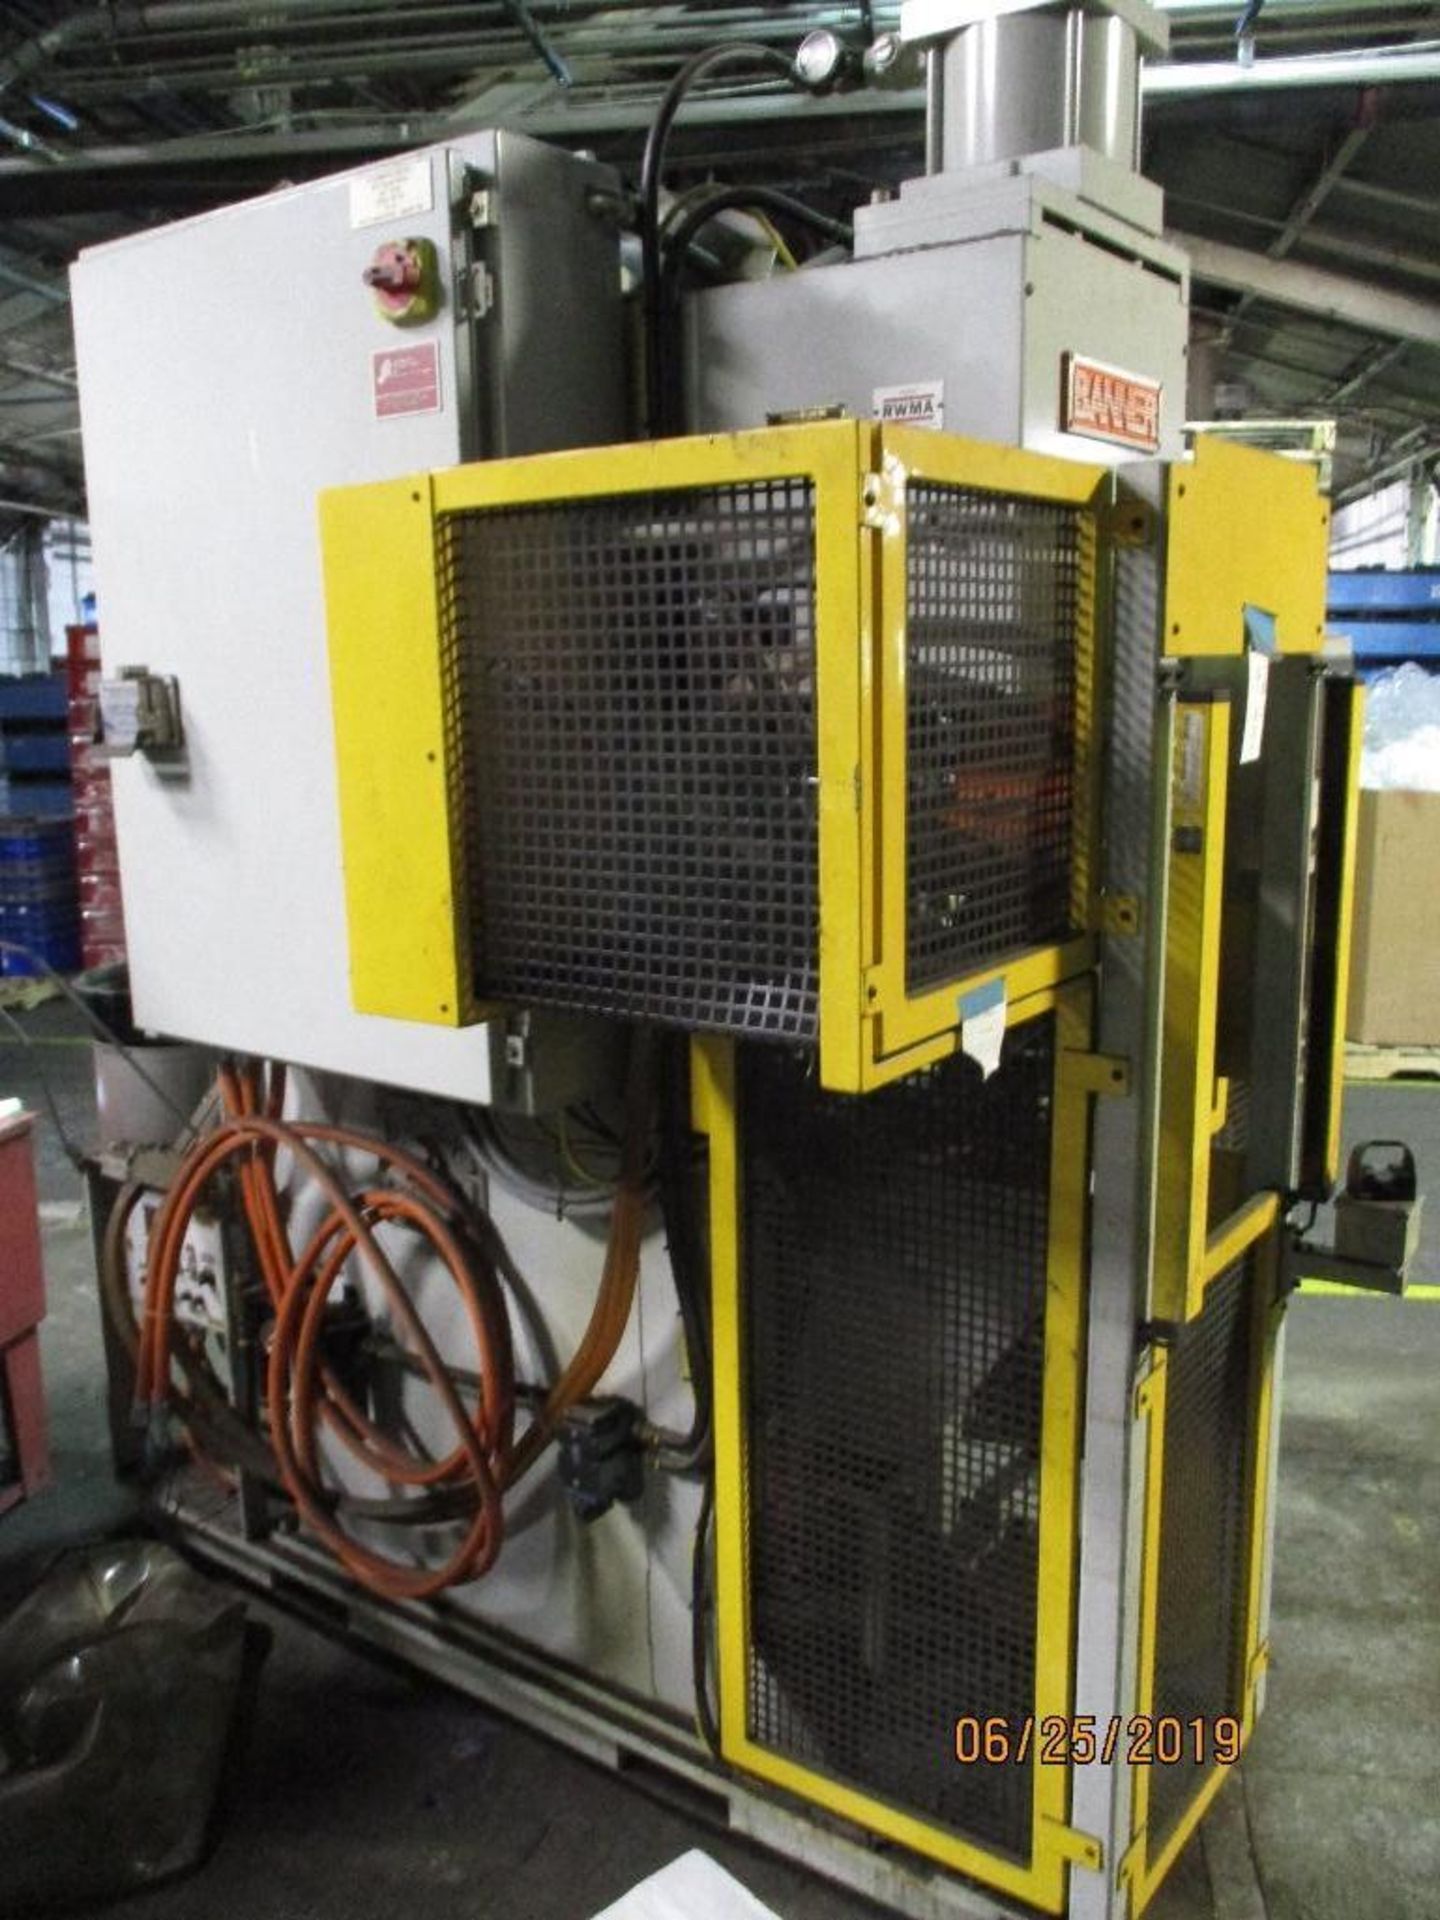 Banner Spot Welder M/N 2AP150A1 S/N 7340, Located at 800 West Broadway St. Three Rivers, MI. 49095 - Image 3 of 10